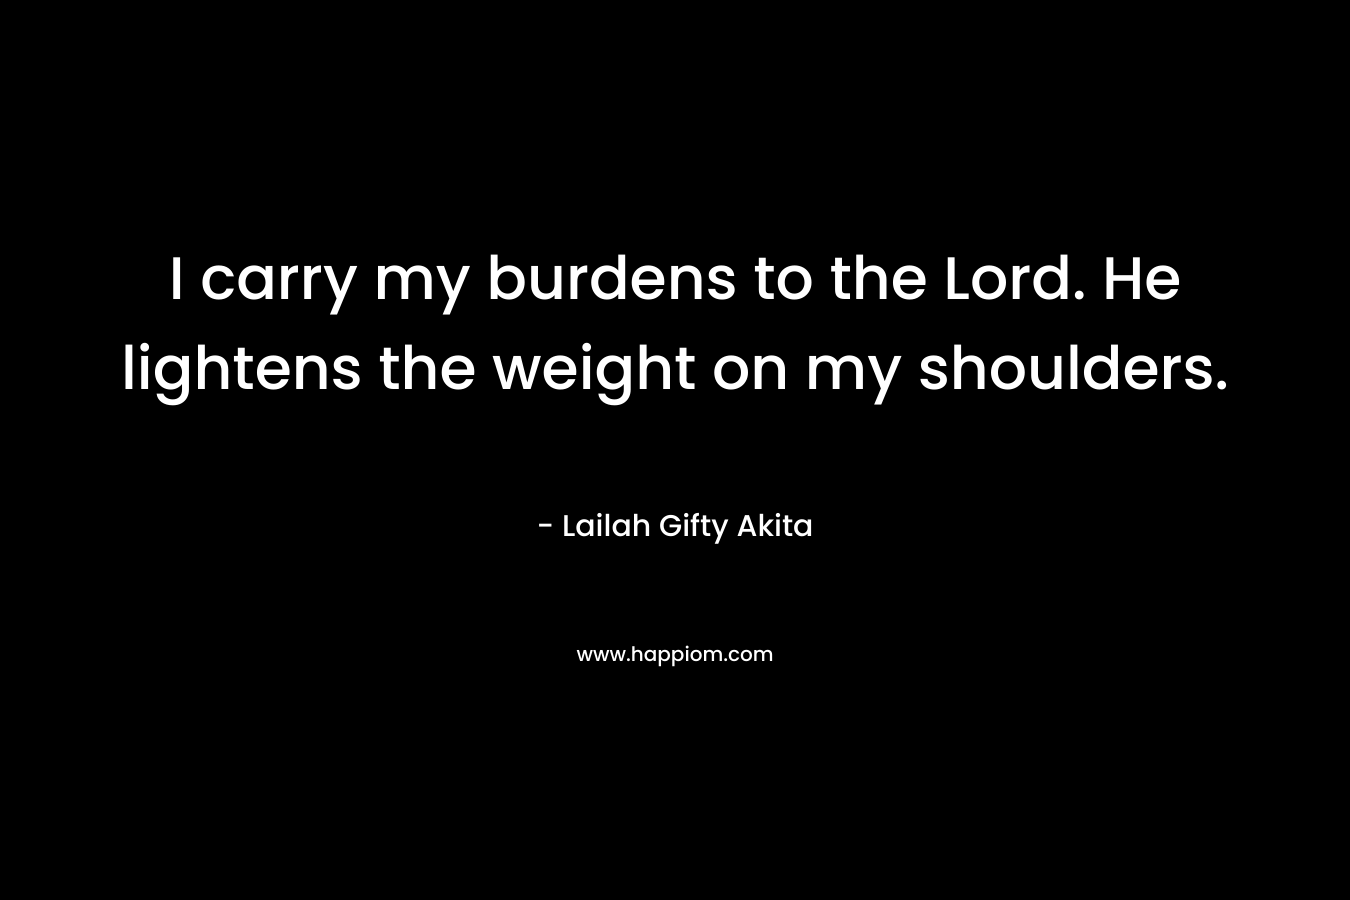 I carry my burdens to the Lord. He lightens the weight on my shoulders. – Lailah Gifty Akita